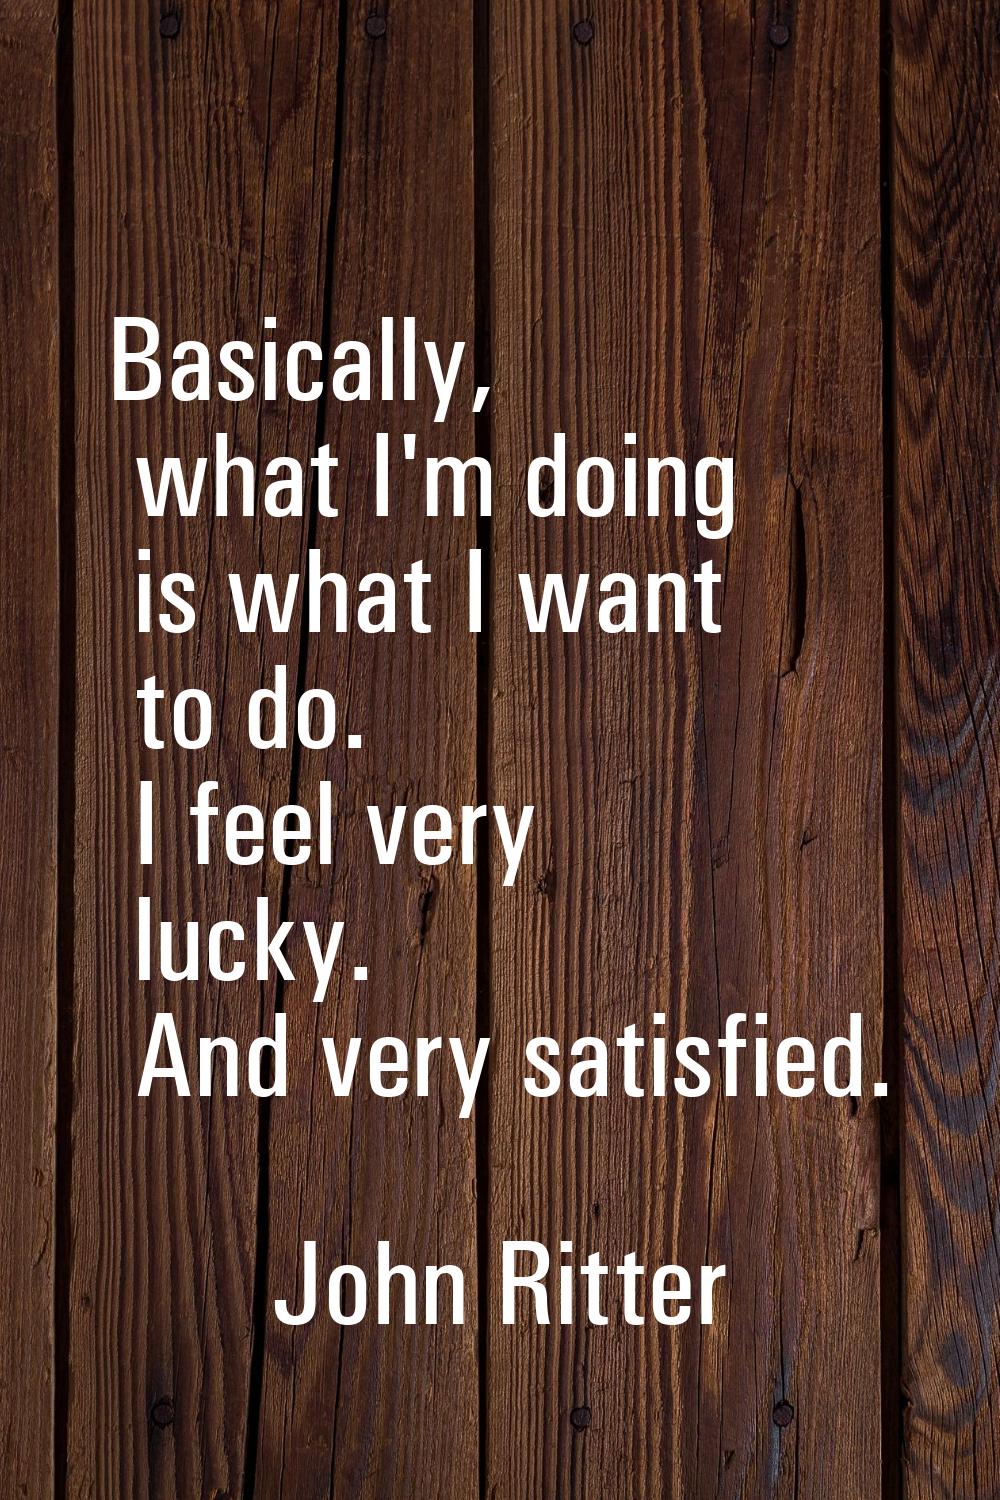 Basically, what I'm doing is what I want to do. I feel very lucky. And very satisfied.